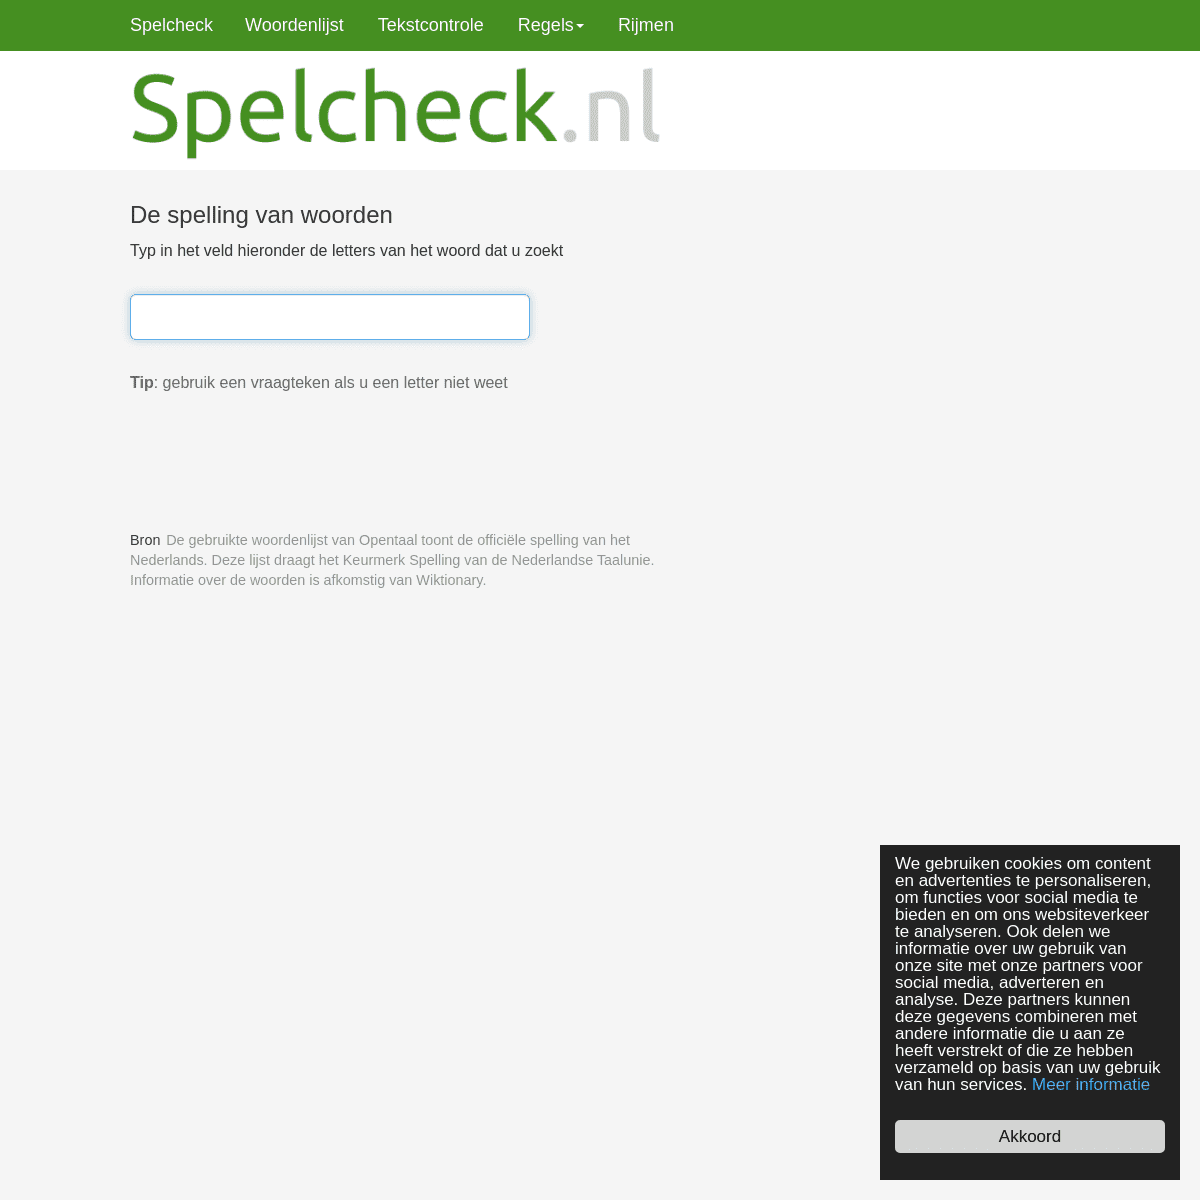 A complete backup of spelcheck.nl